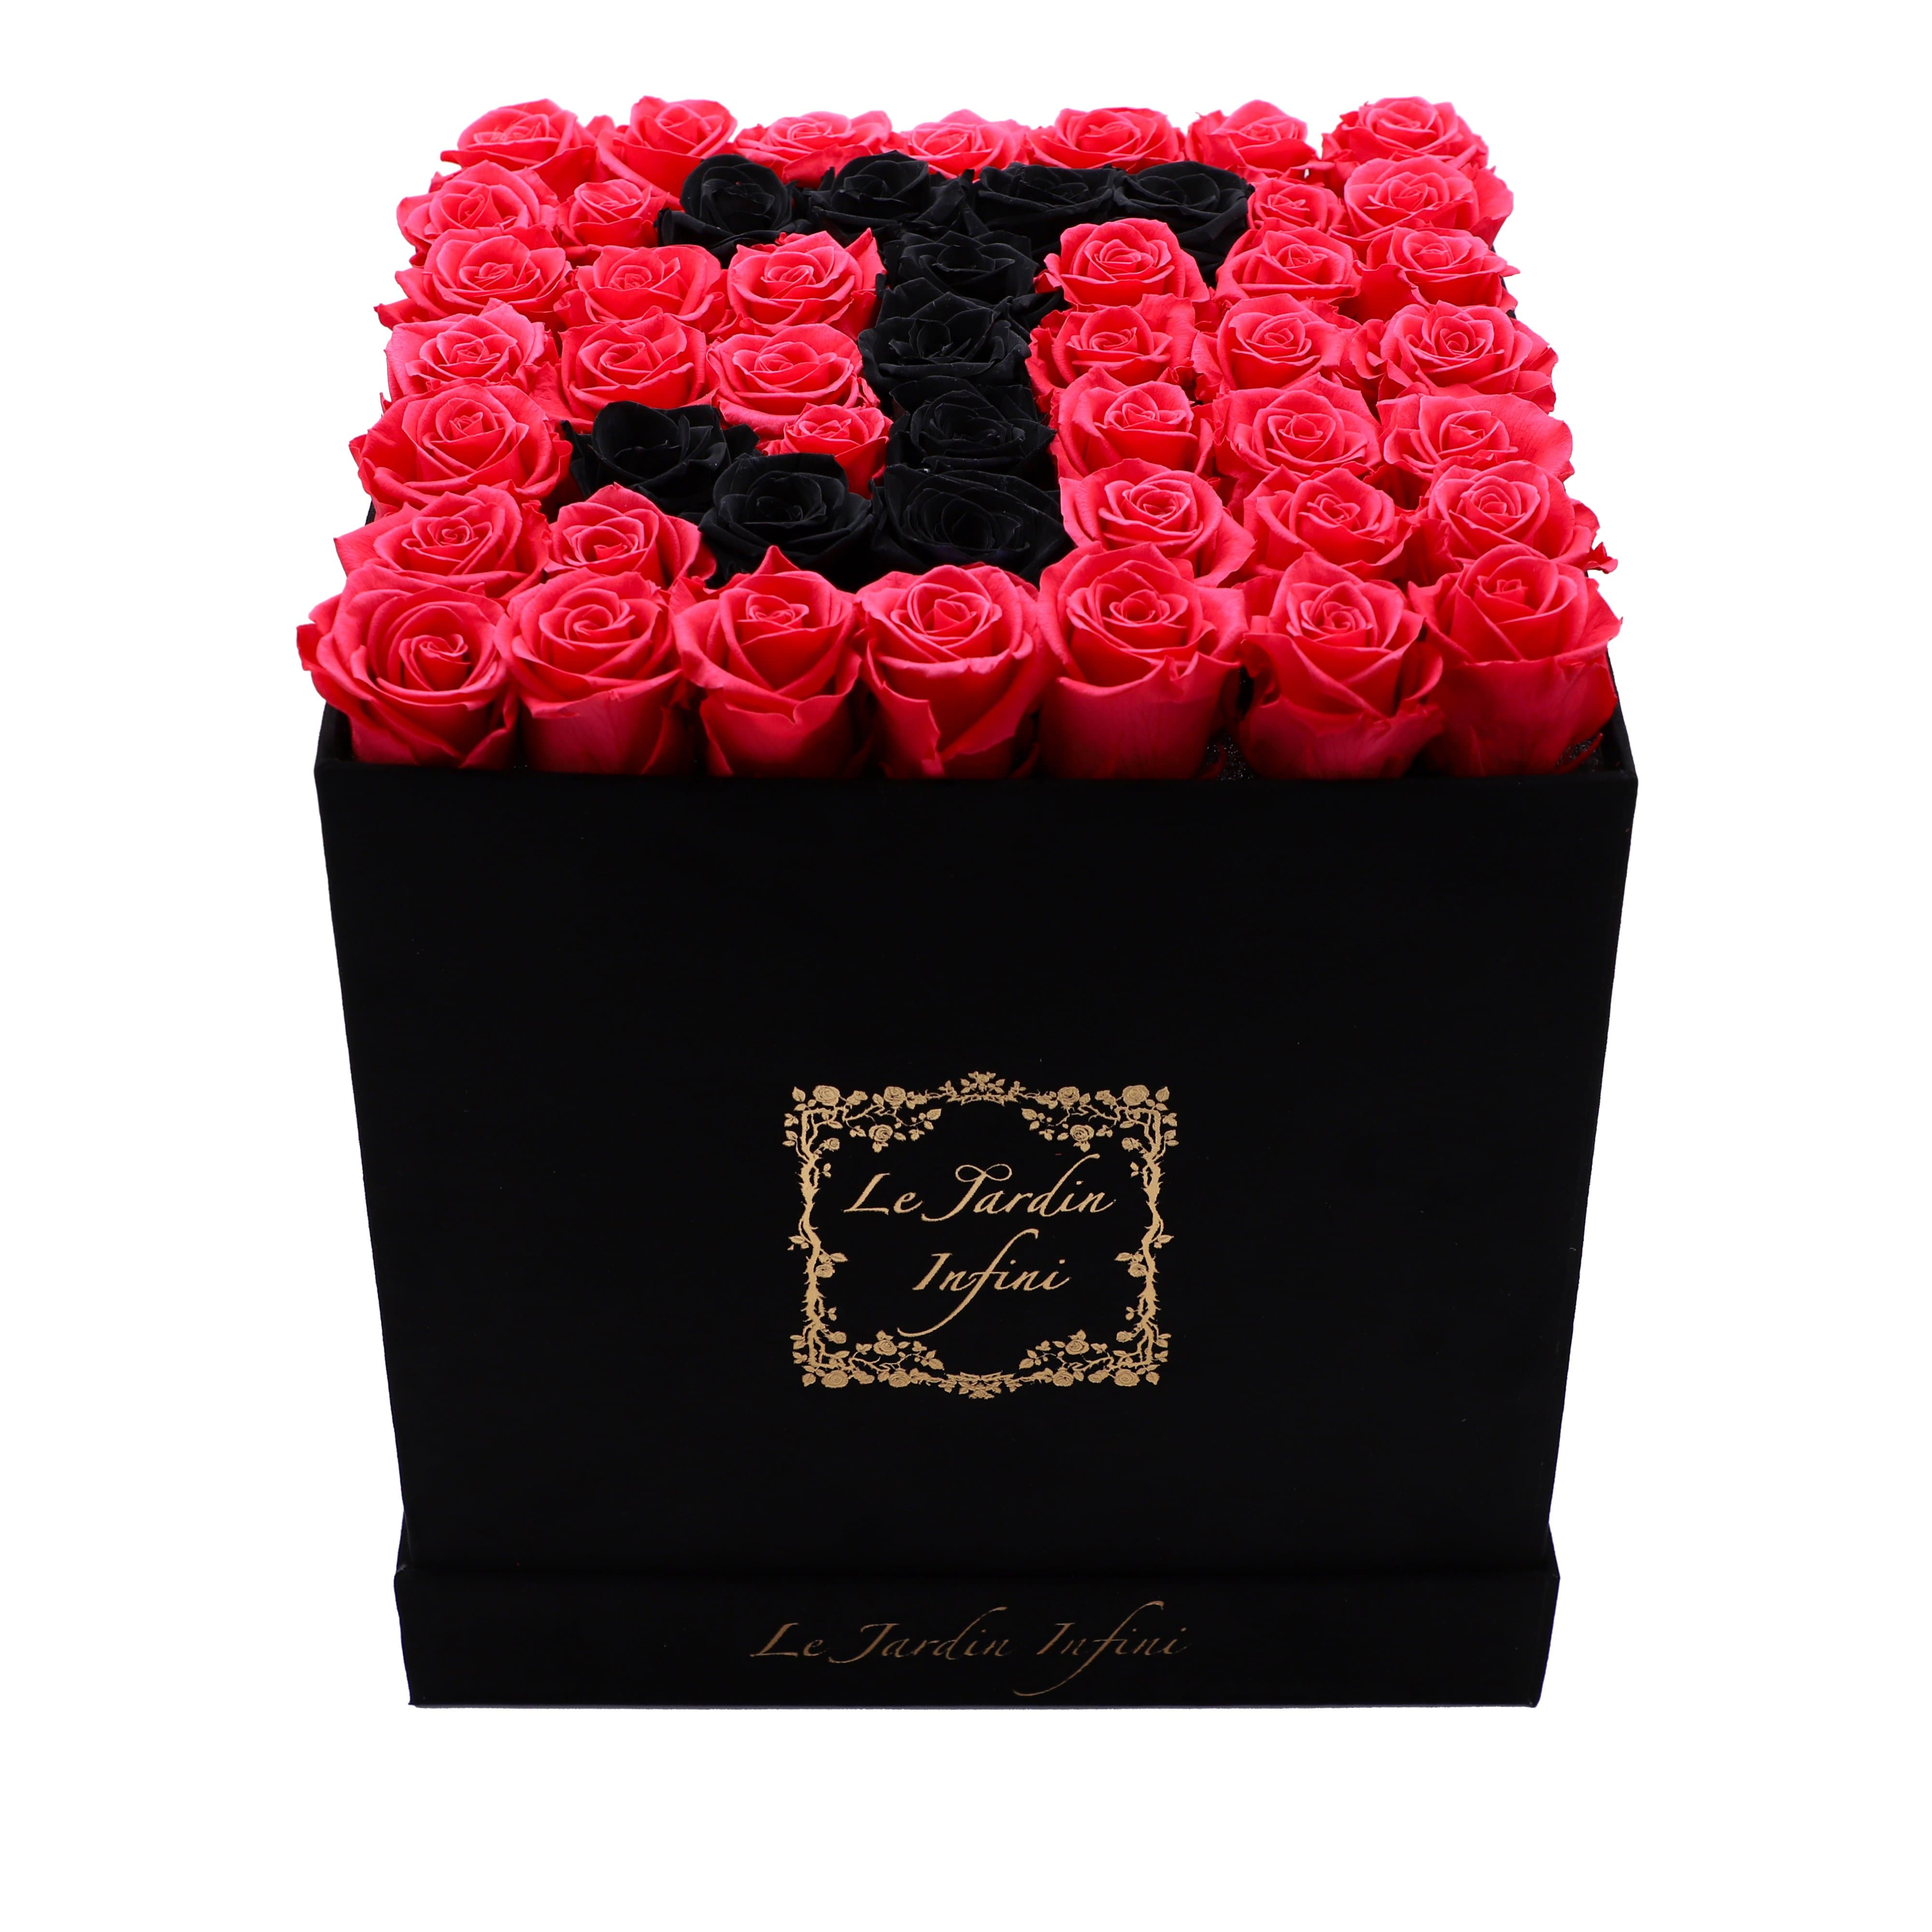 Letter J Black & Red Preserved Roses - Large Square Luxury Black Suede Box - Le Jardin Infini Roses in a Box